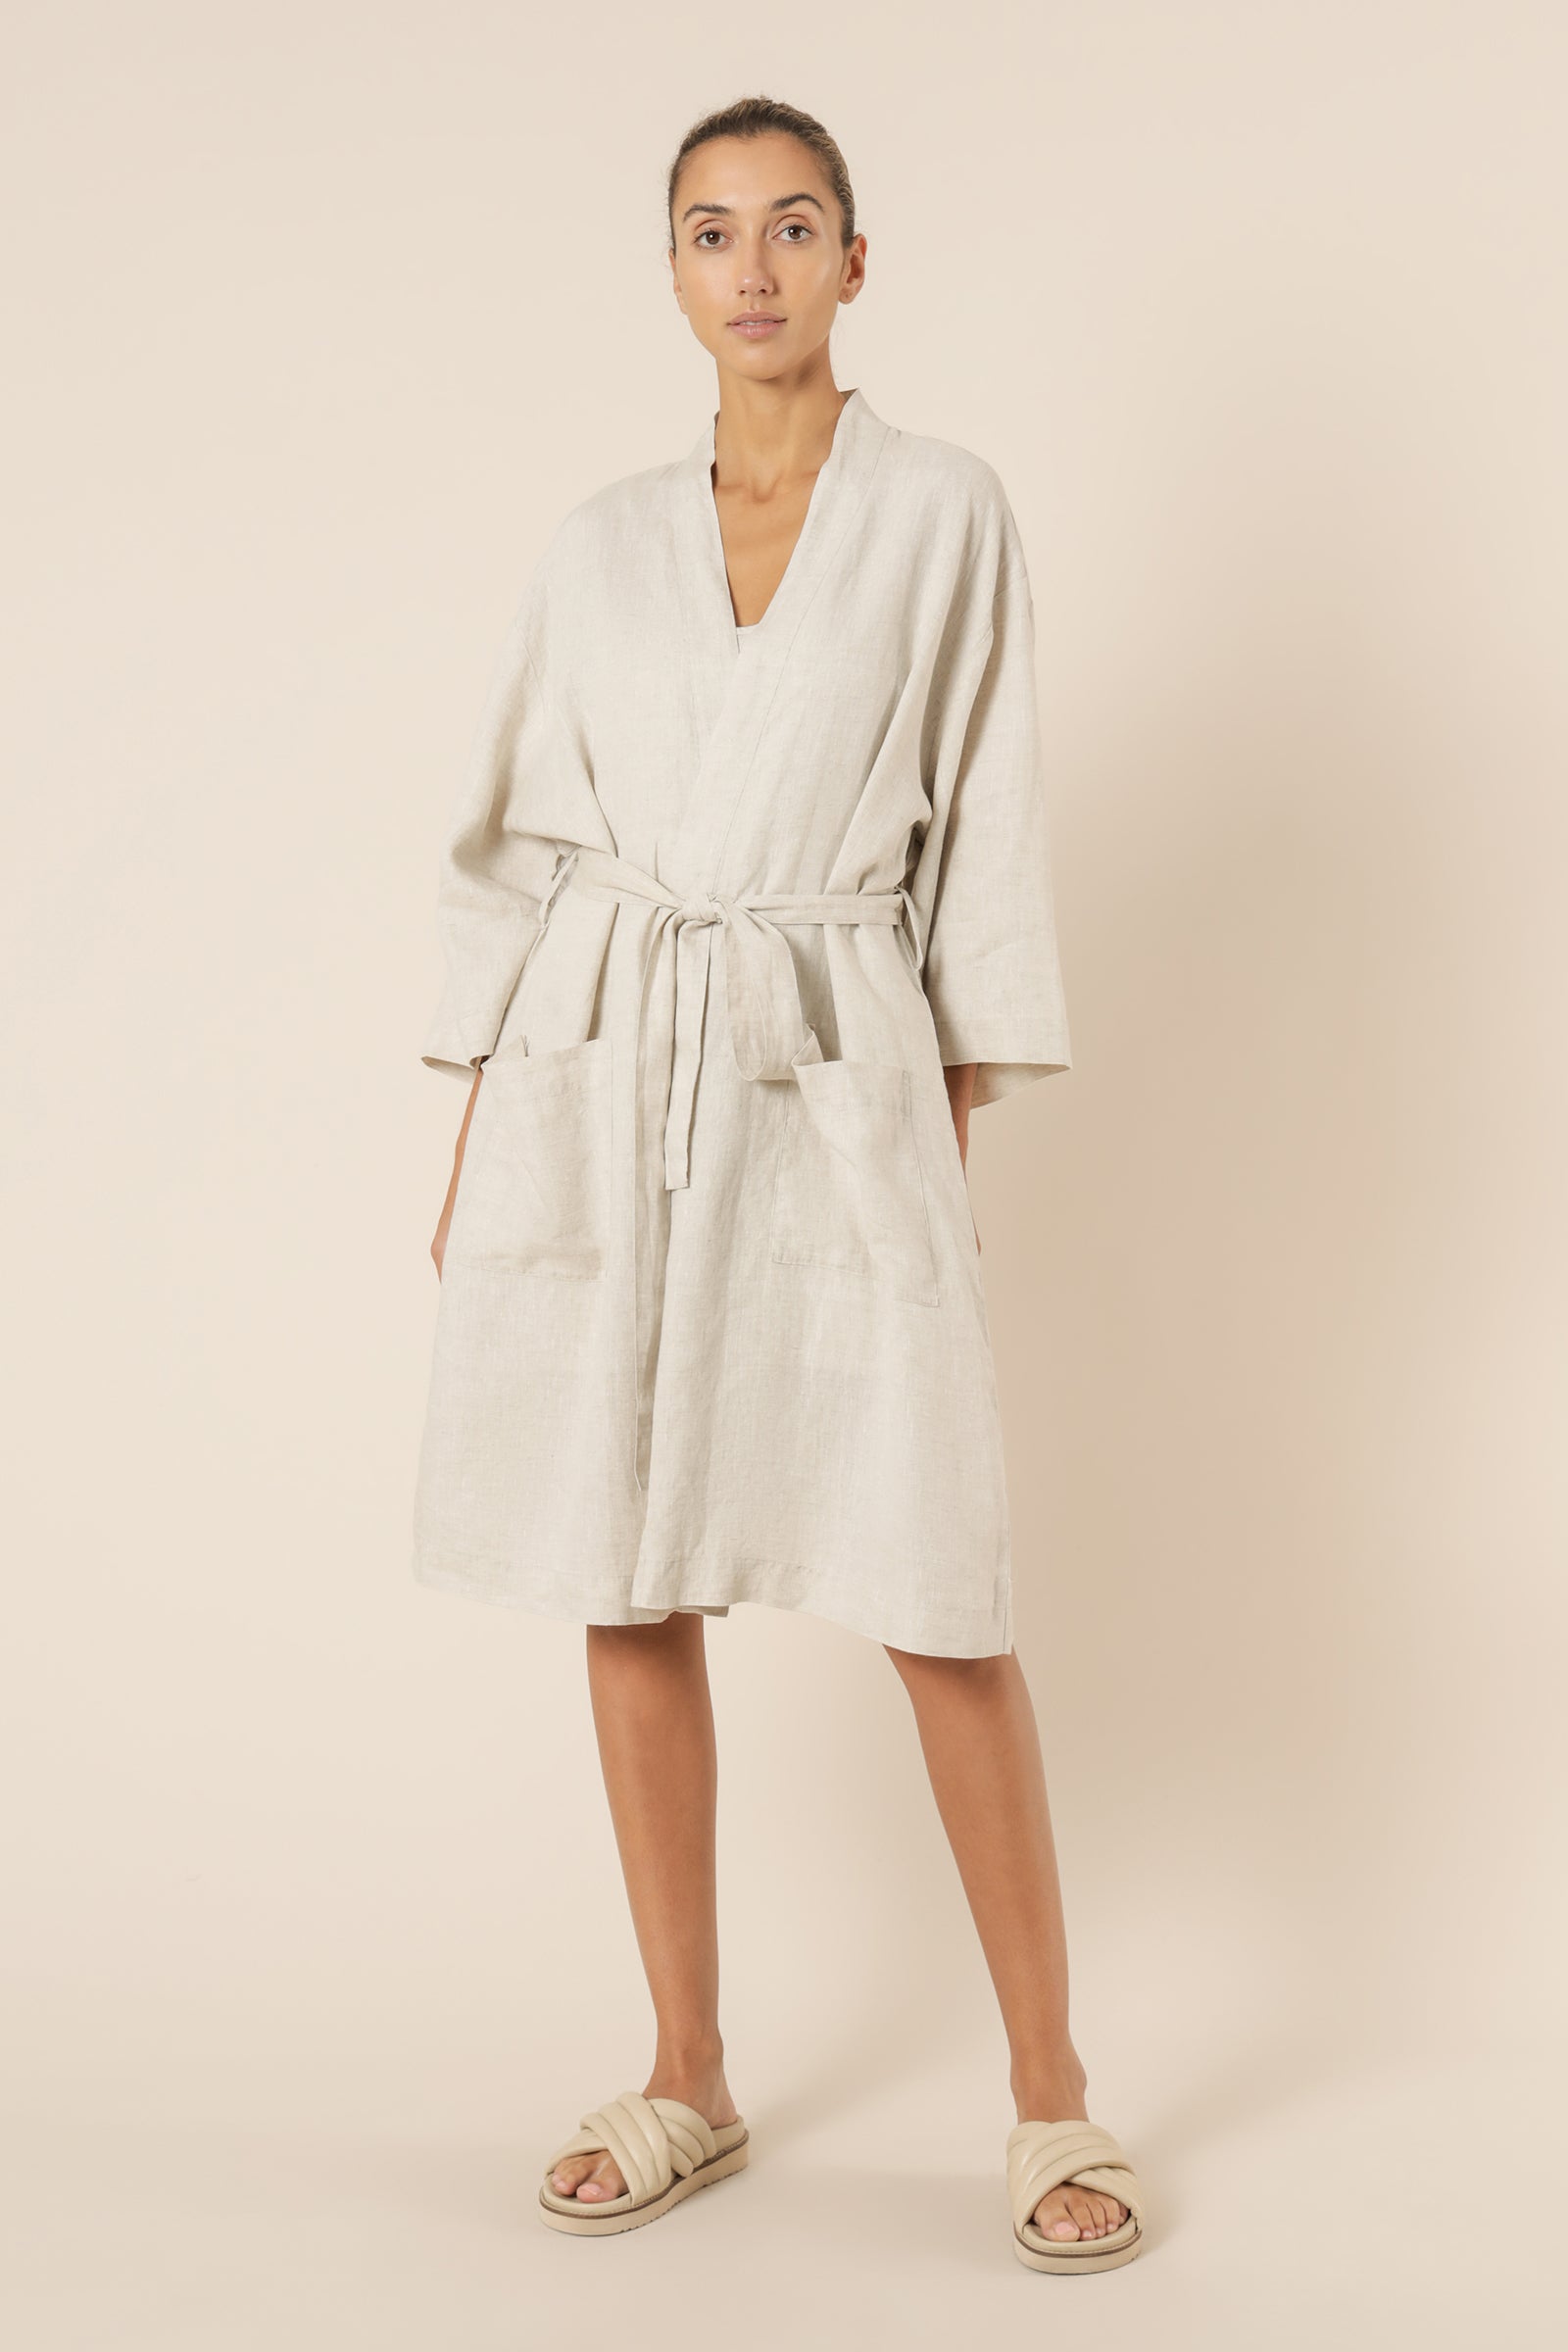 Nude Lucy nude lounge linen robe natural